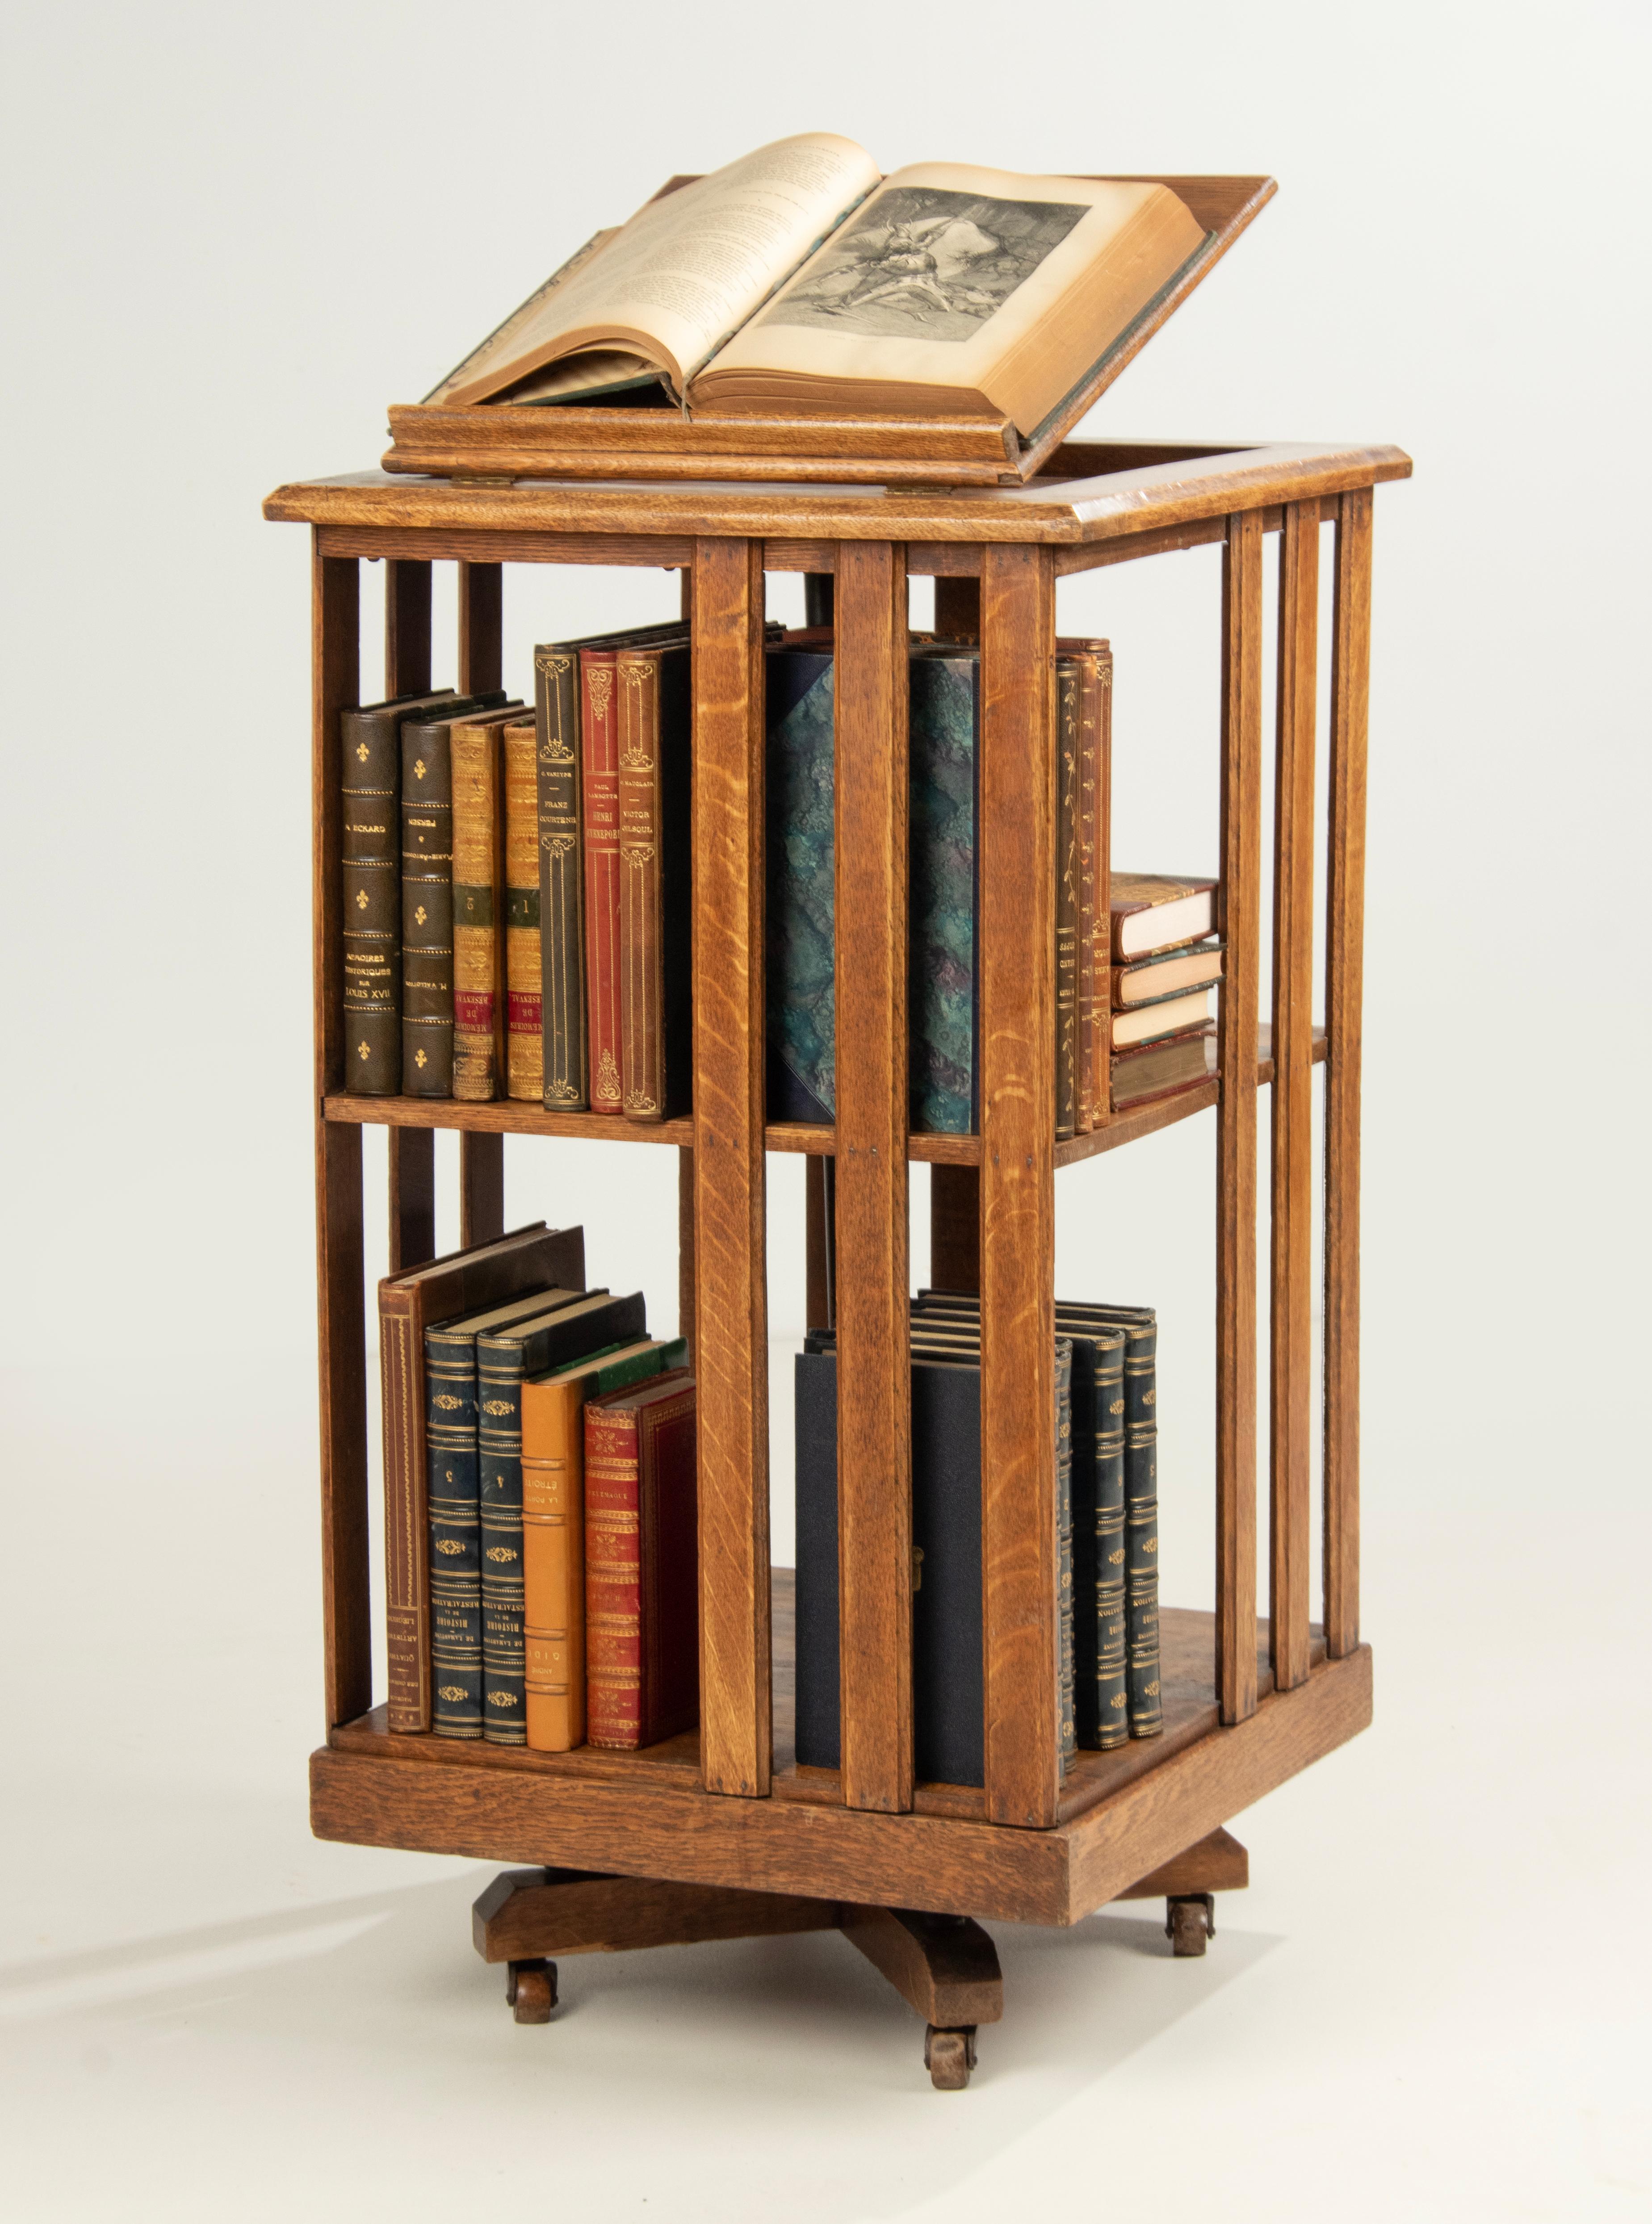 An antique solid oak revolving bookcase. Made and marked John Danner Manufacturing Co., Clayton Ohio. The bookmill can rotate by the central iron rod, resting on a cast iron base with underneath wheels. It has two tiers covered with slat sides,